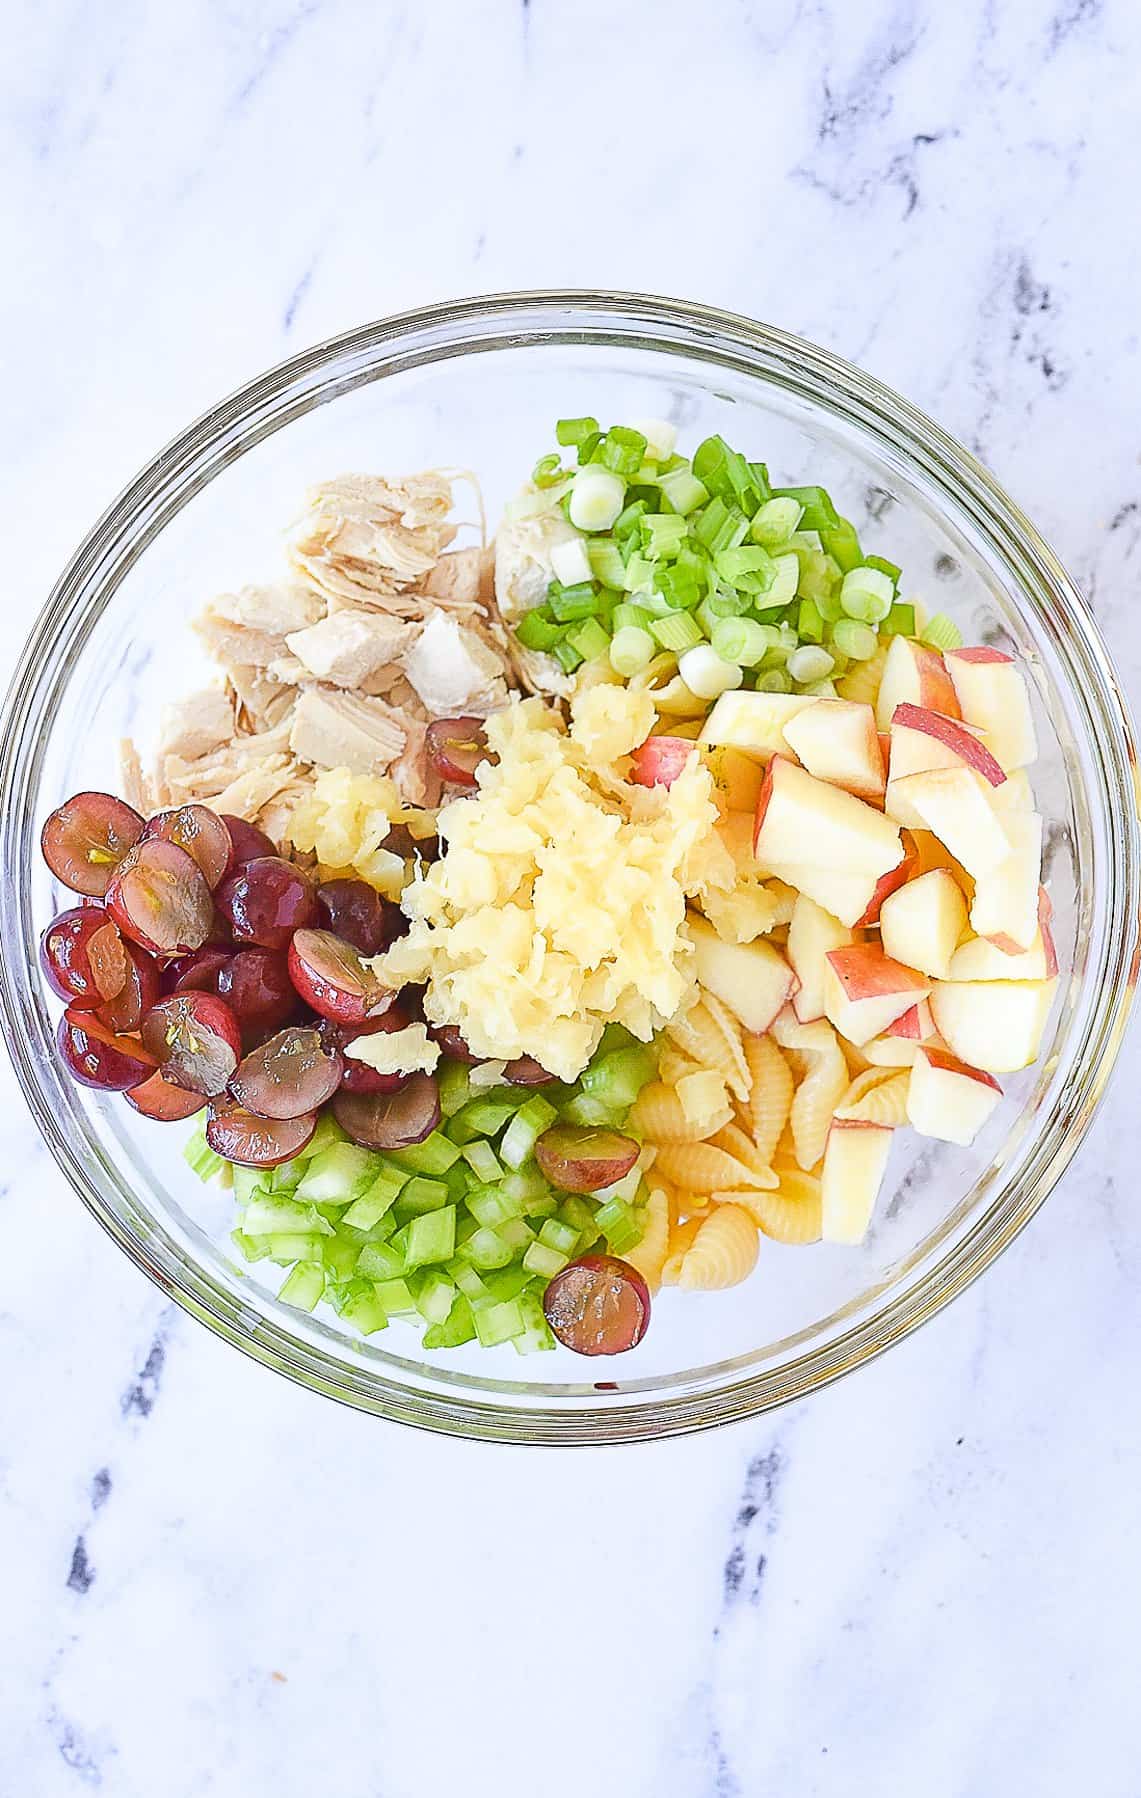 chicken salad with pasta ingredients in a bowl